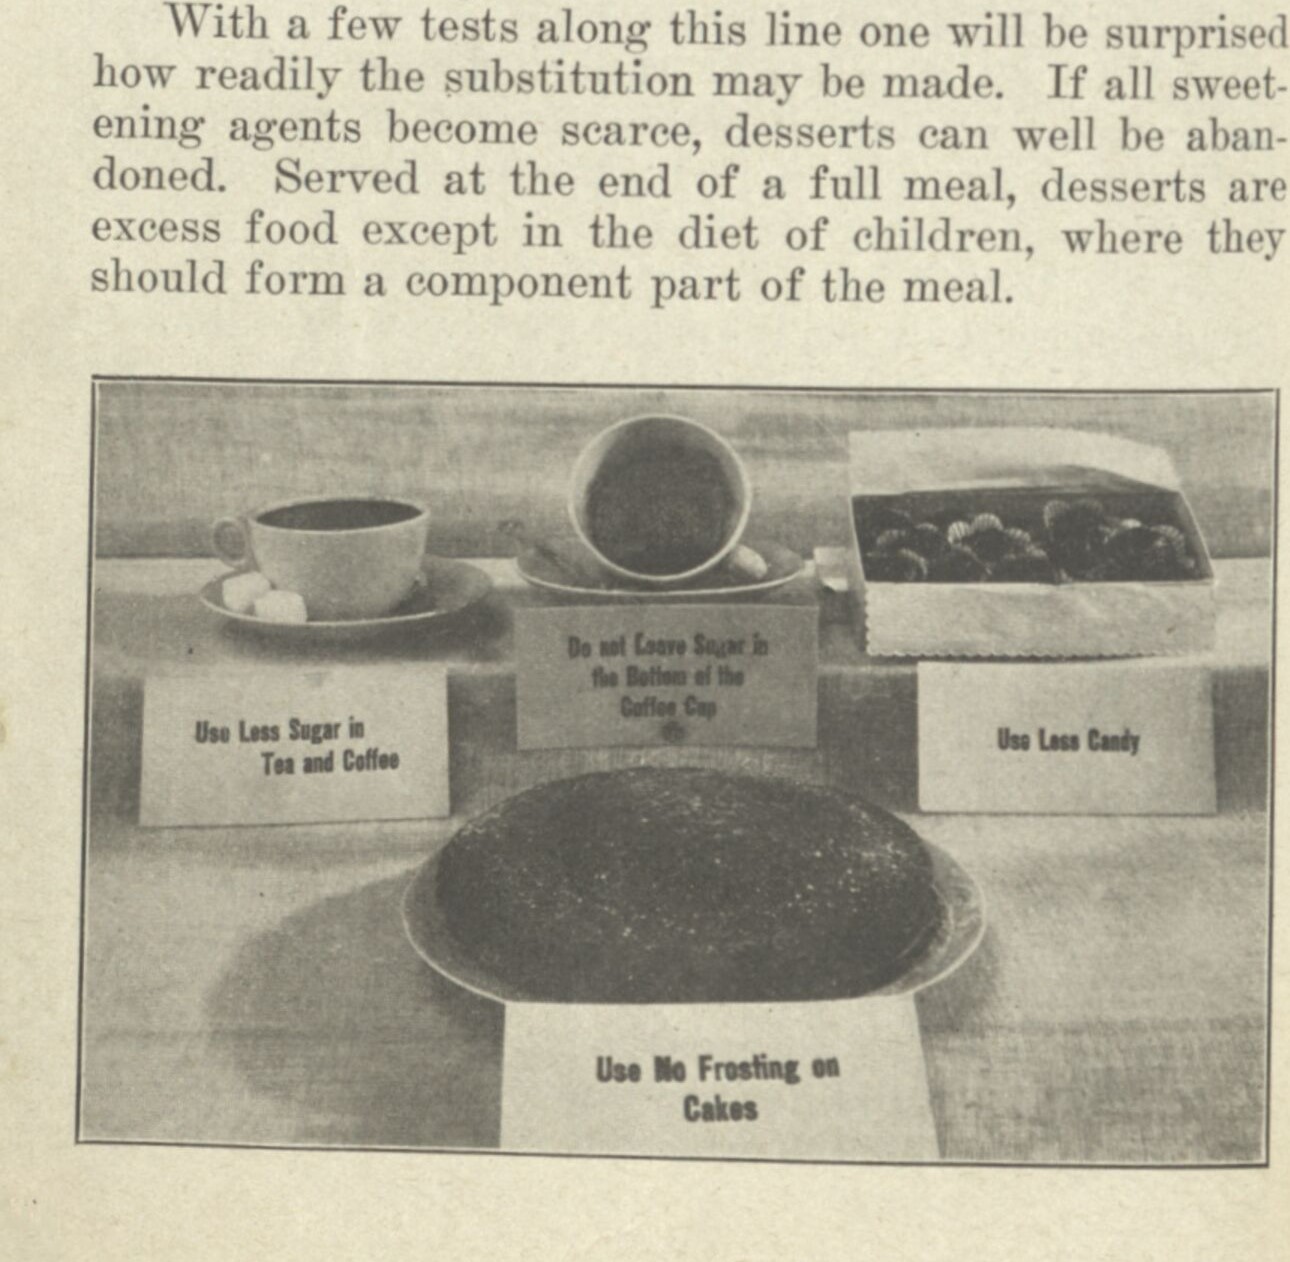 Image and text about sugarless desserts from "Foods That Will Win the War"